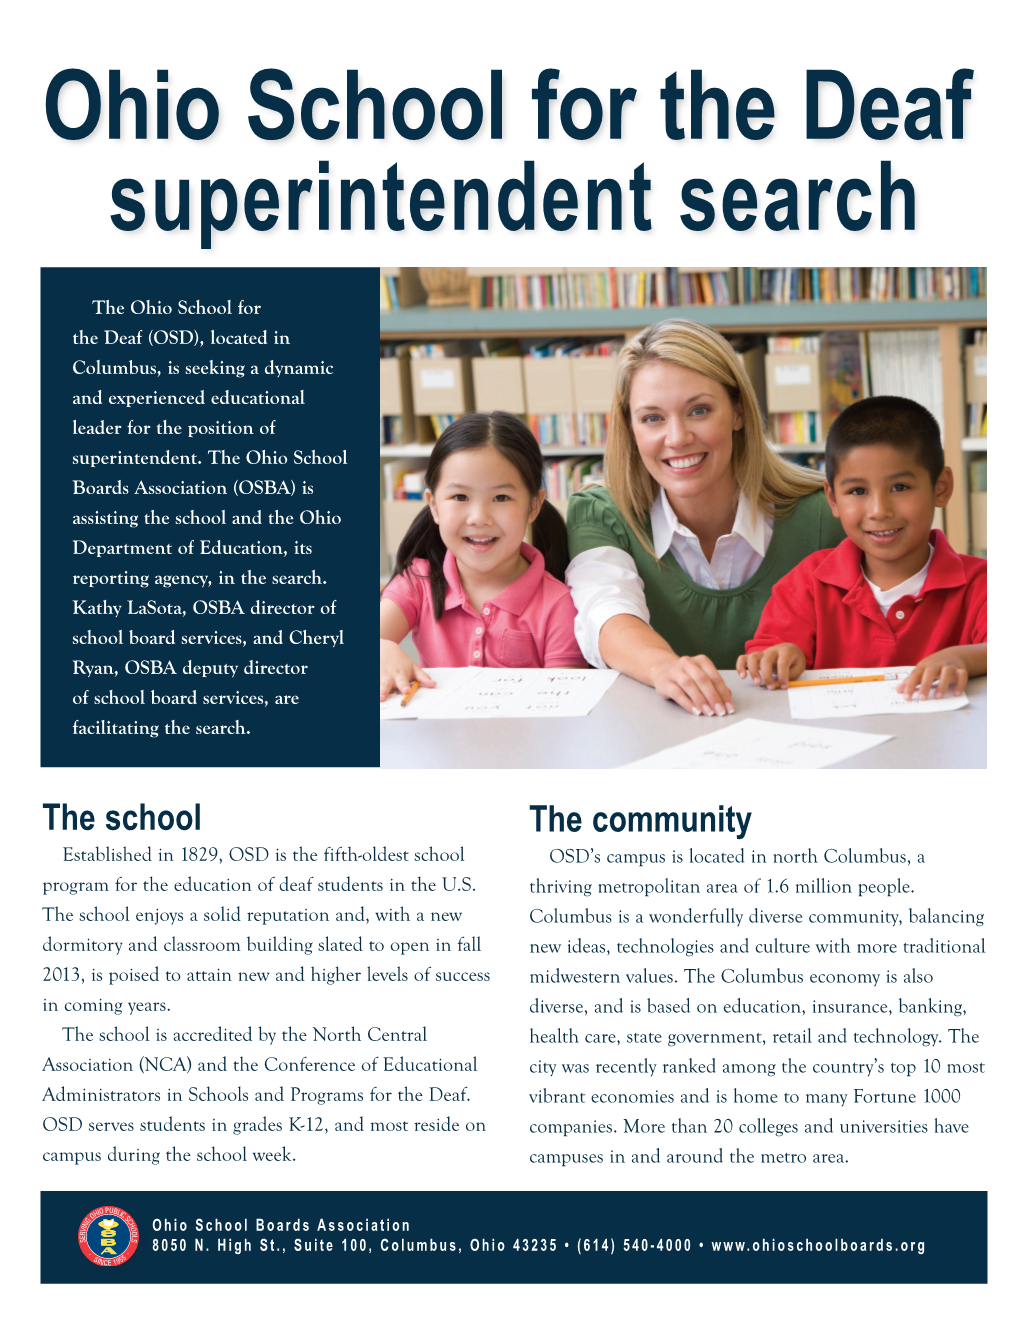 Ohio School for the Deaf Superintendent Search